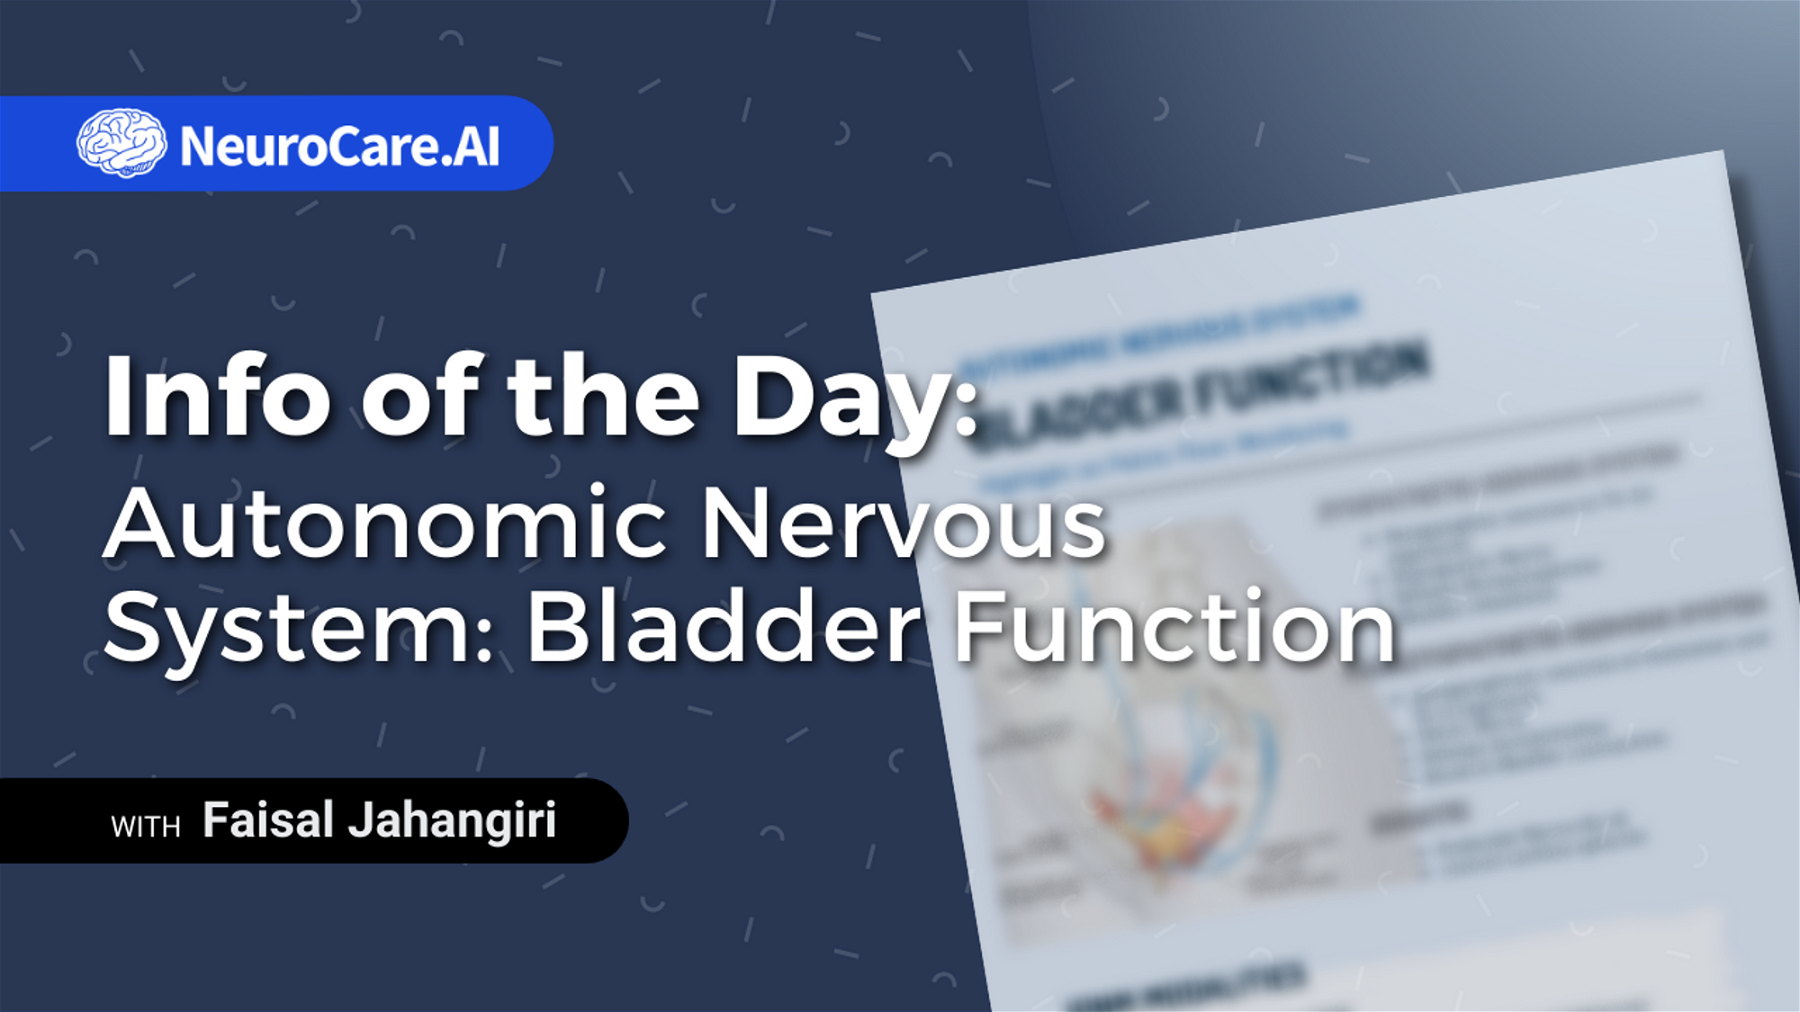 Info of the Day: "Autonomic Nervous System: Bladder Function"